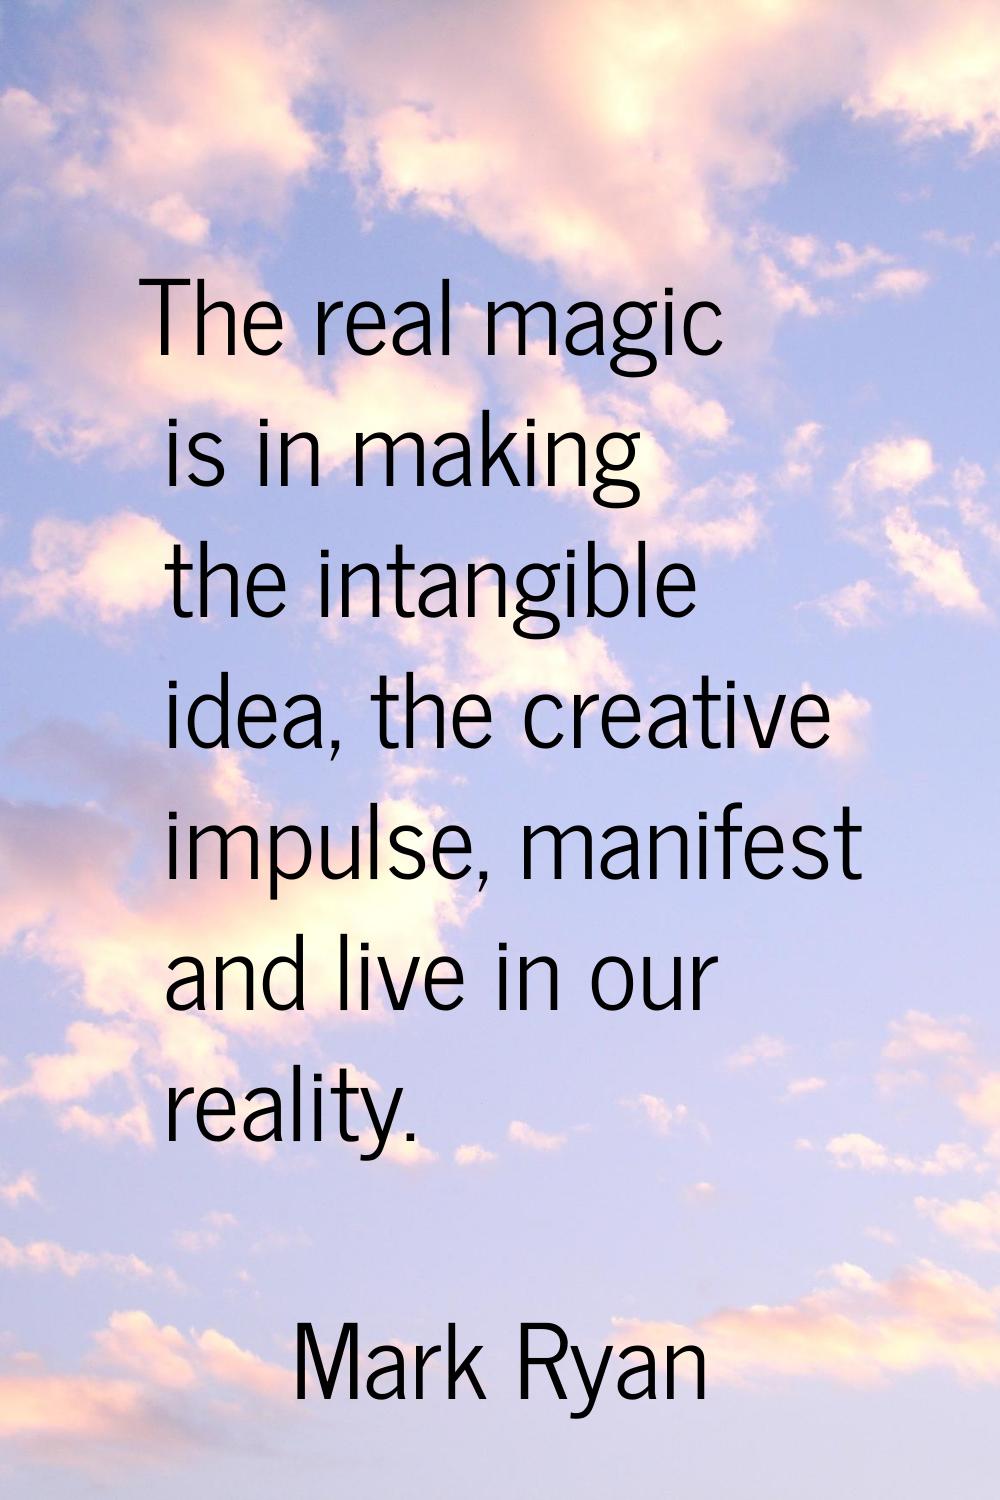 The real magic is in making the intangible idea, the creative impulse, manifest and live in our rea